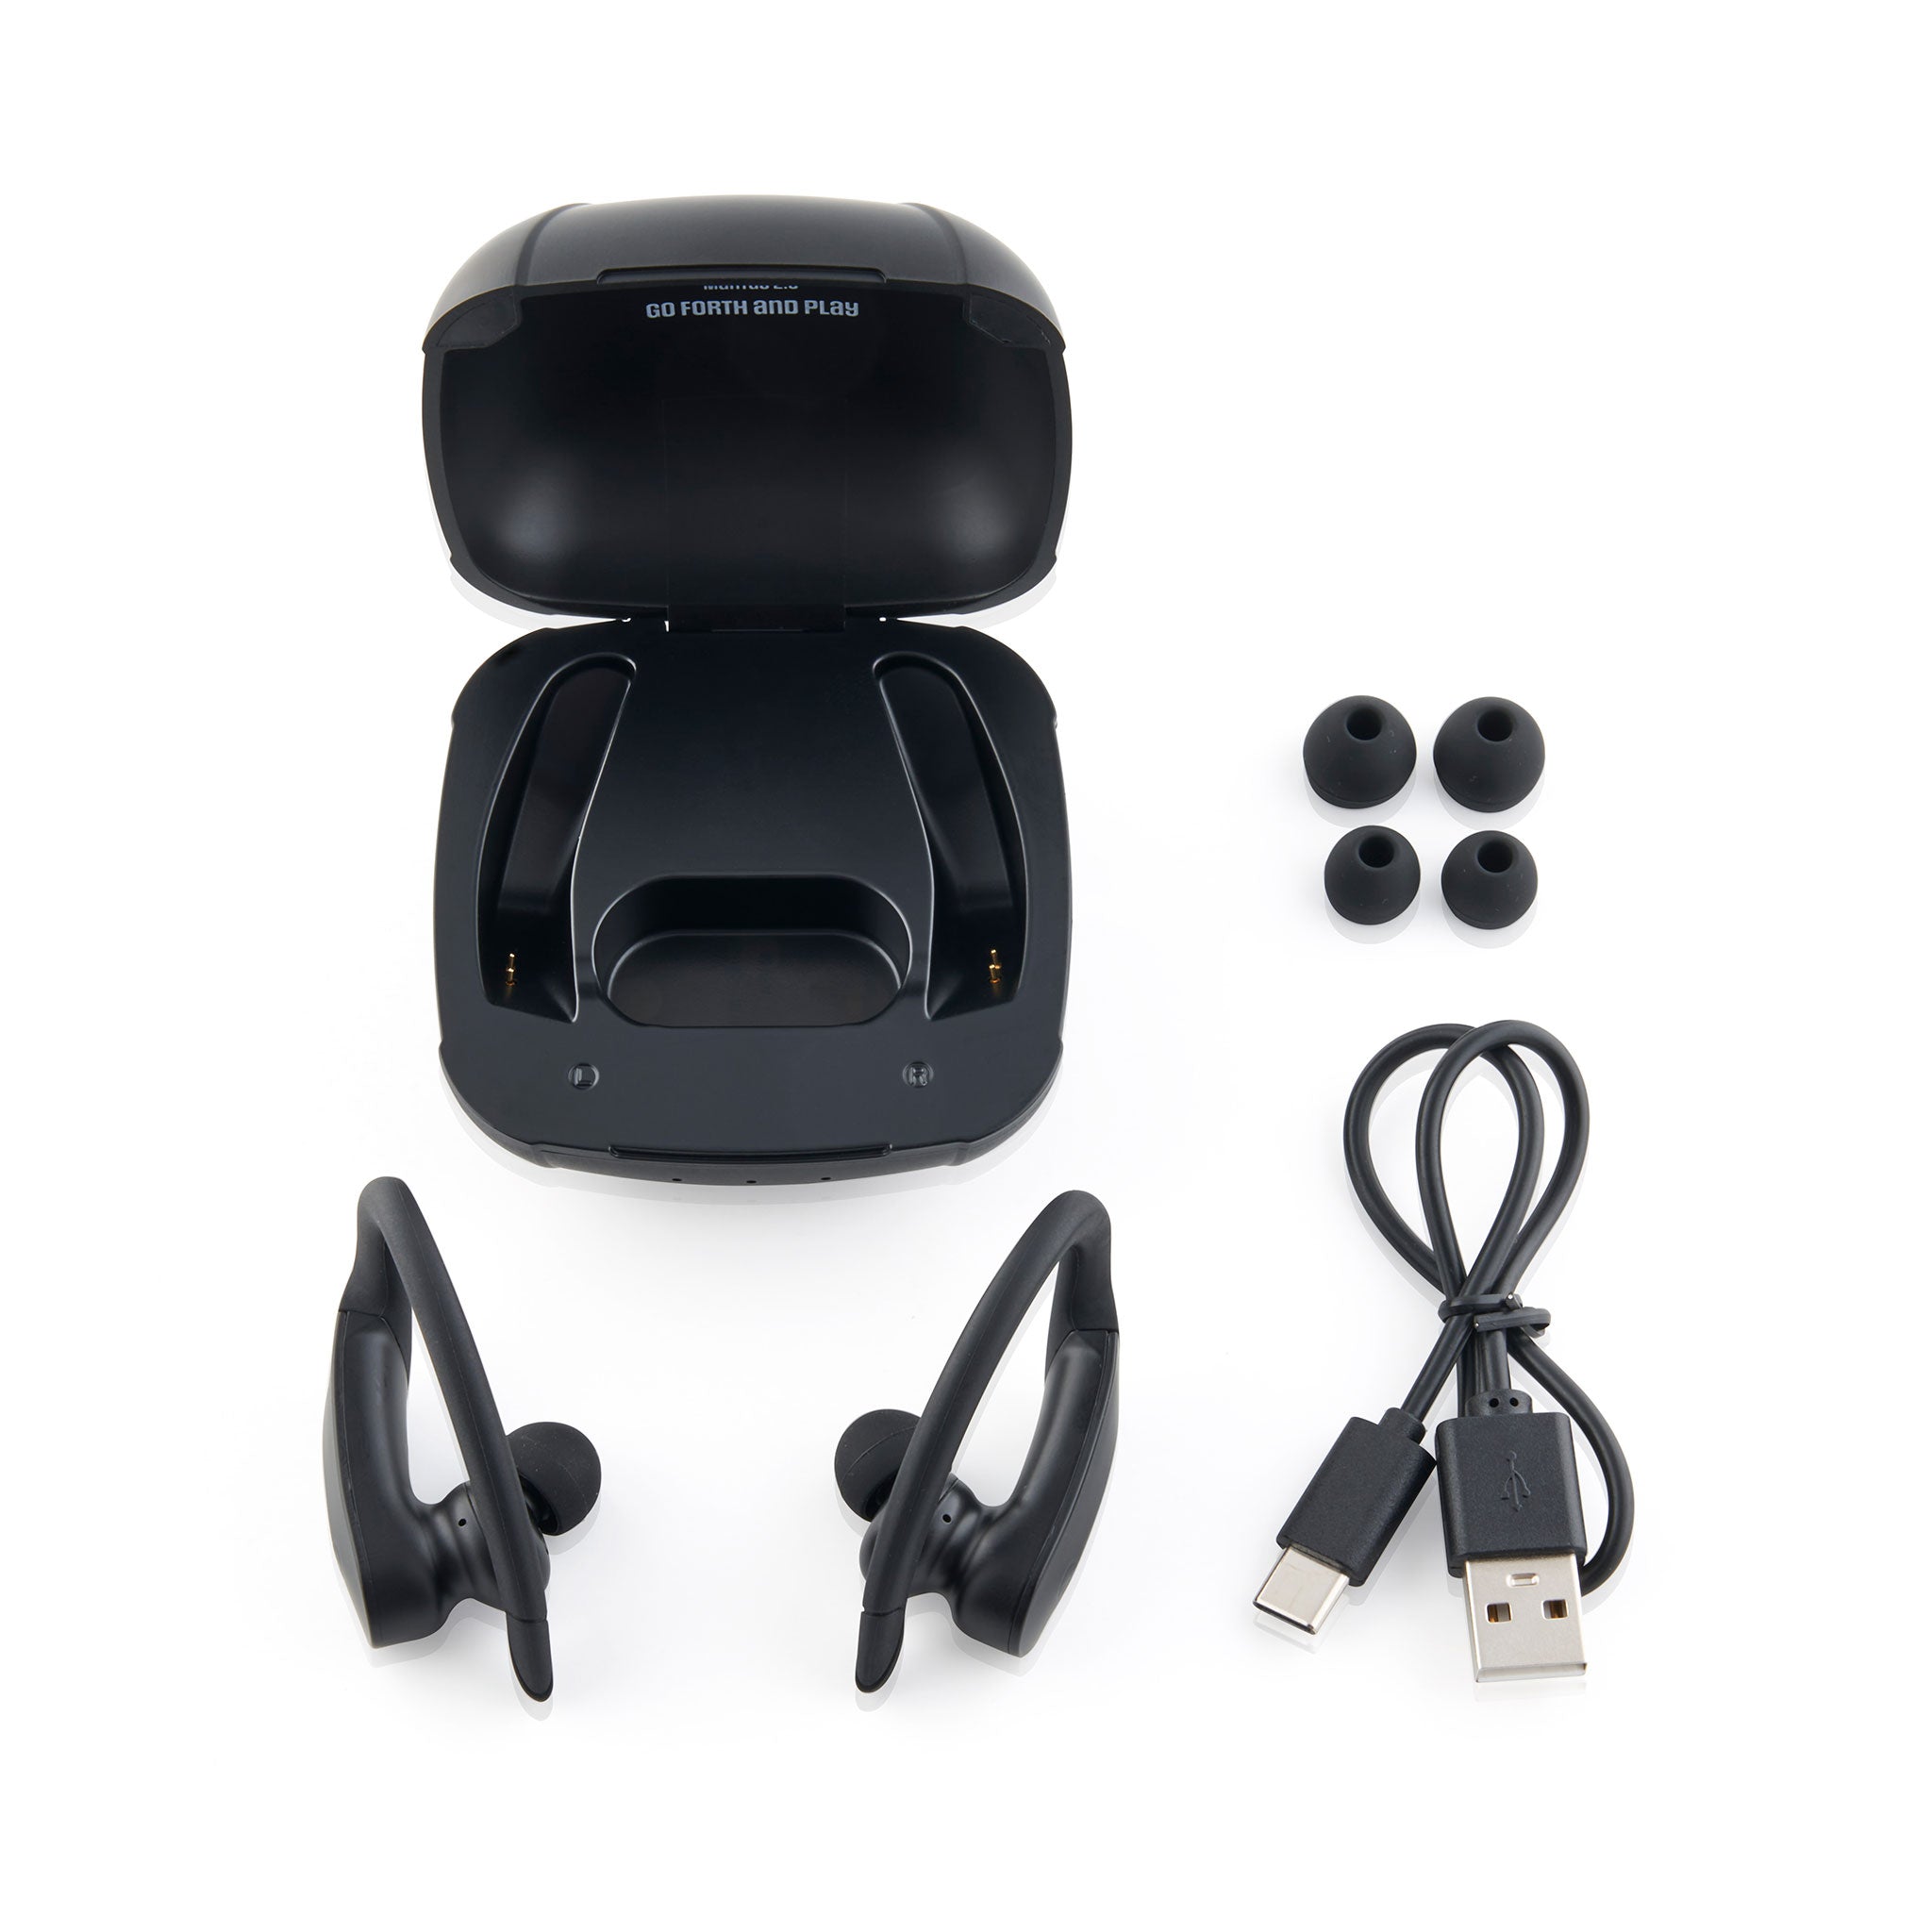 Free Mantas 2.0 Earbuds With Recharging Case